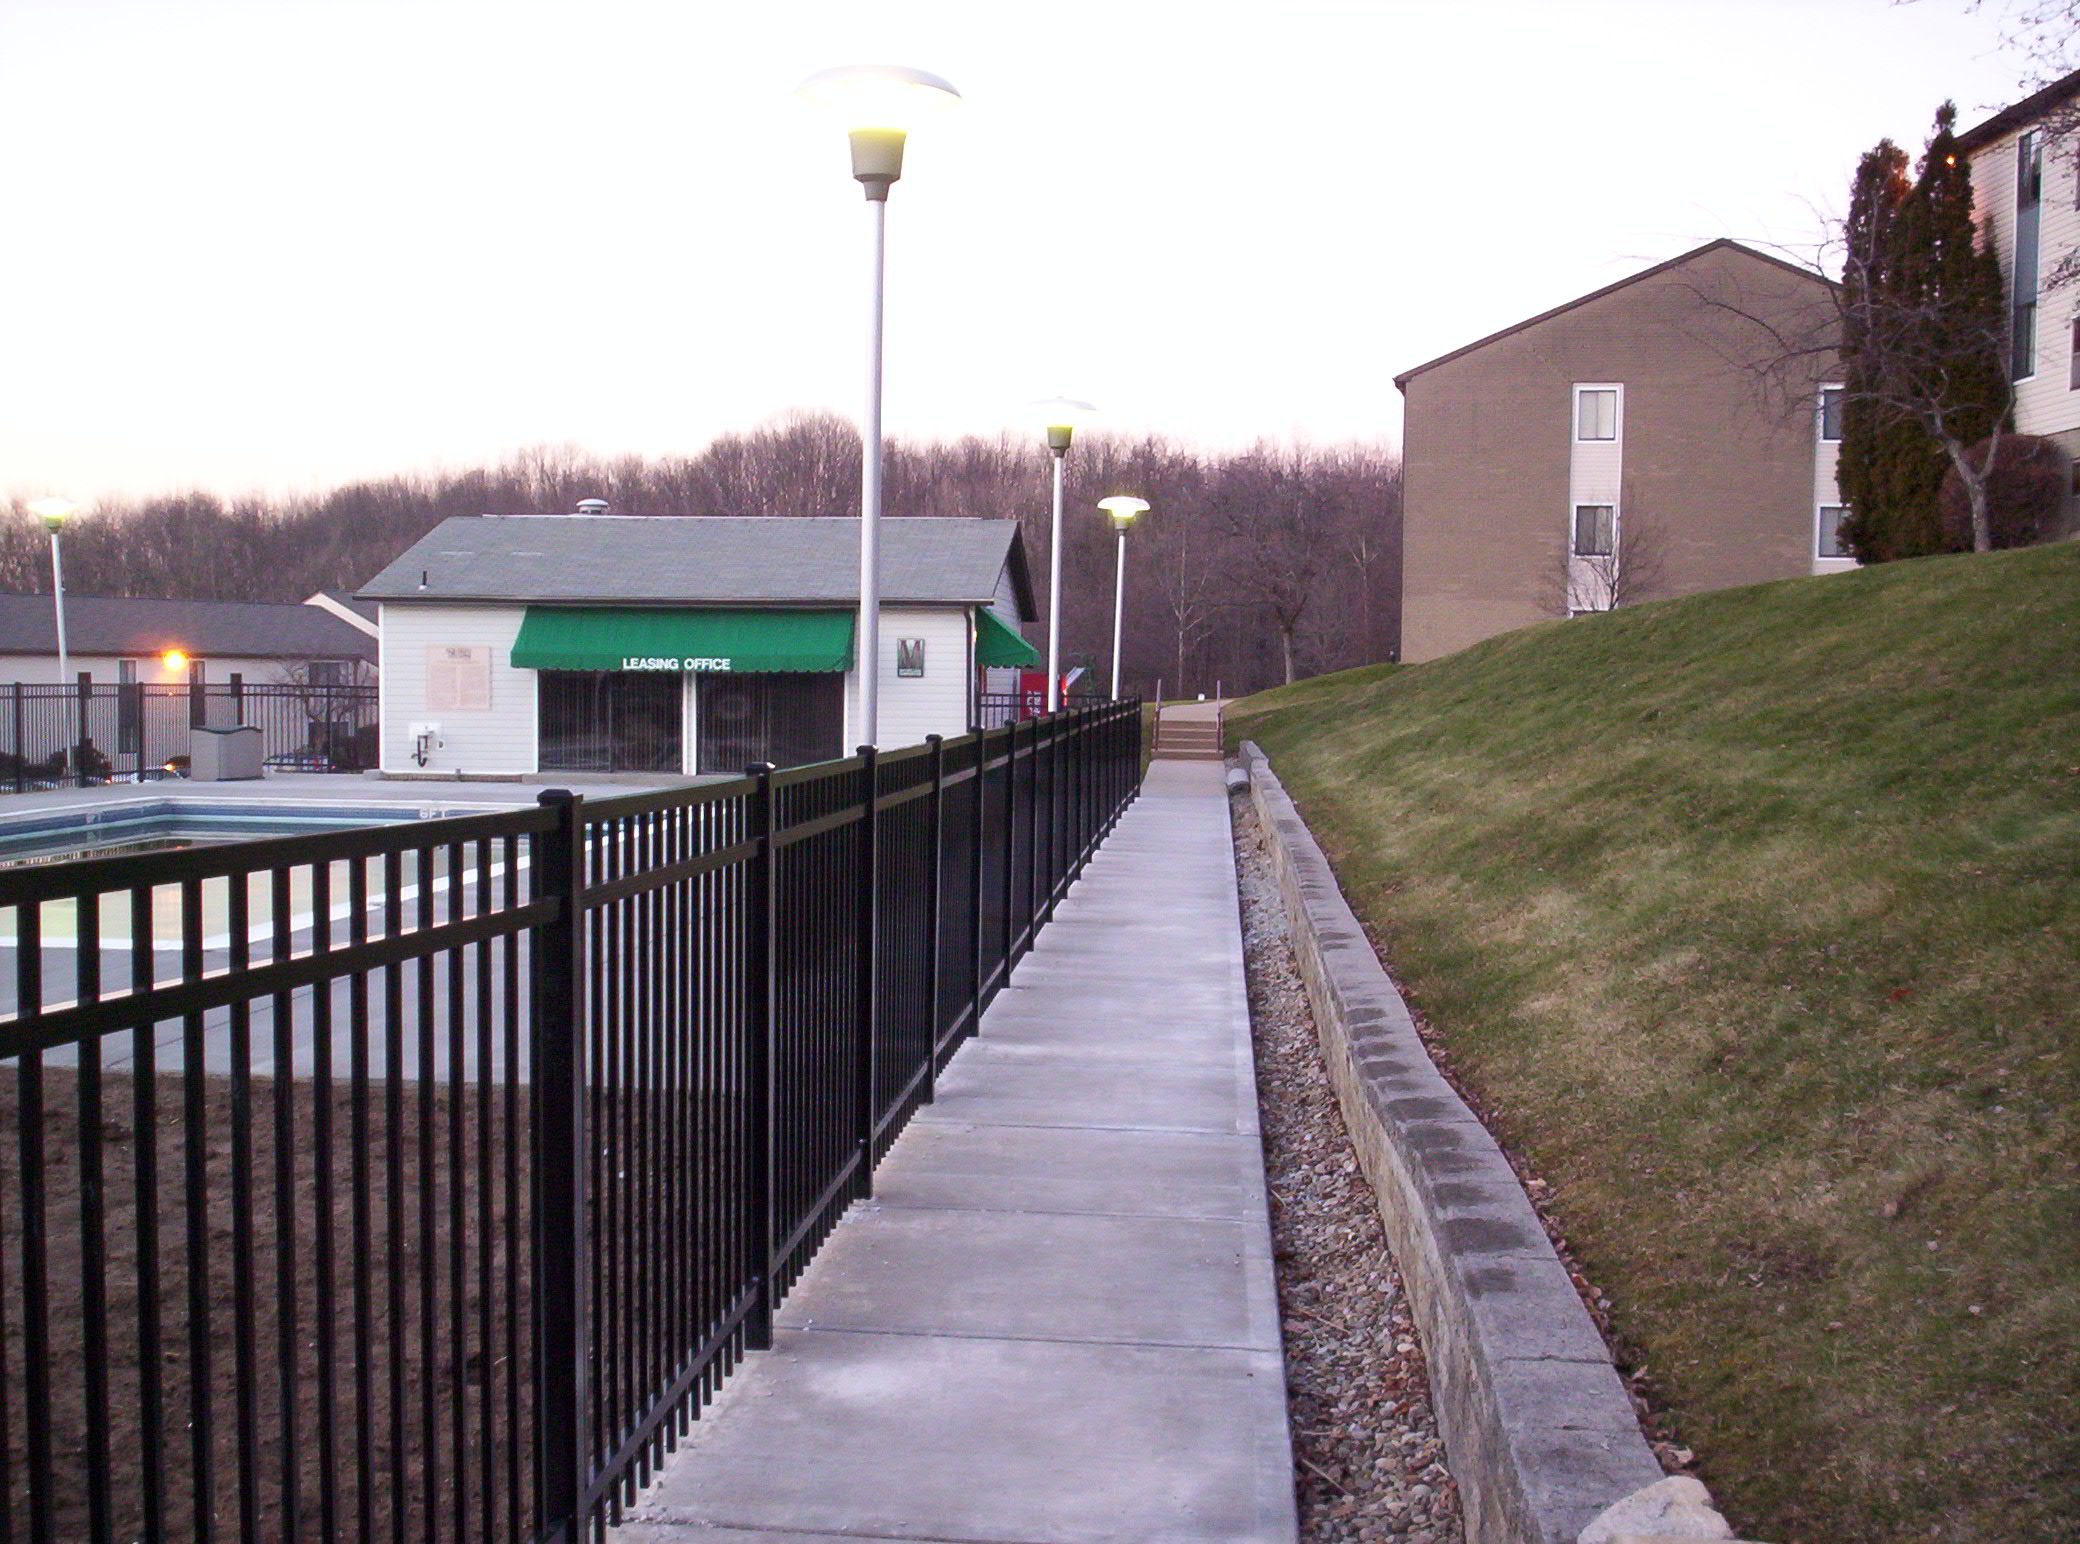 commercial fence installation